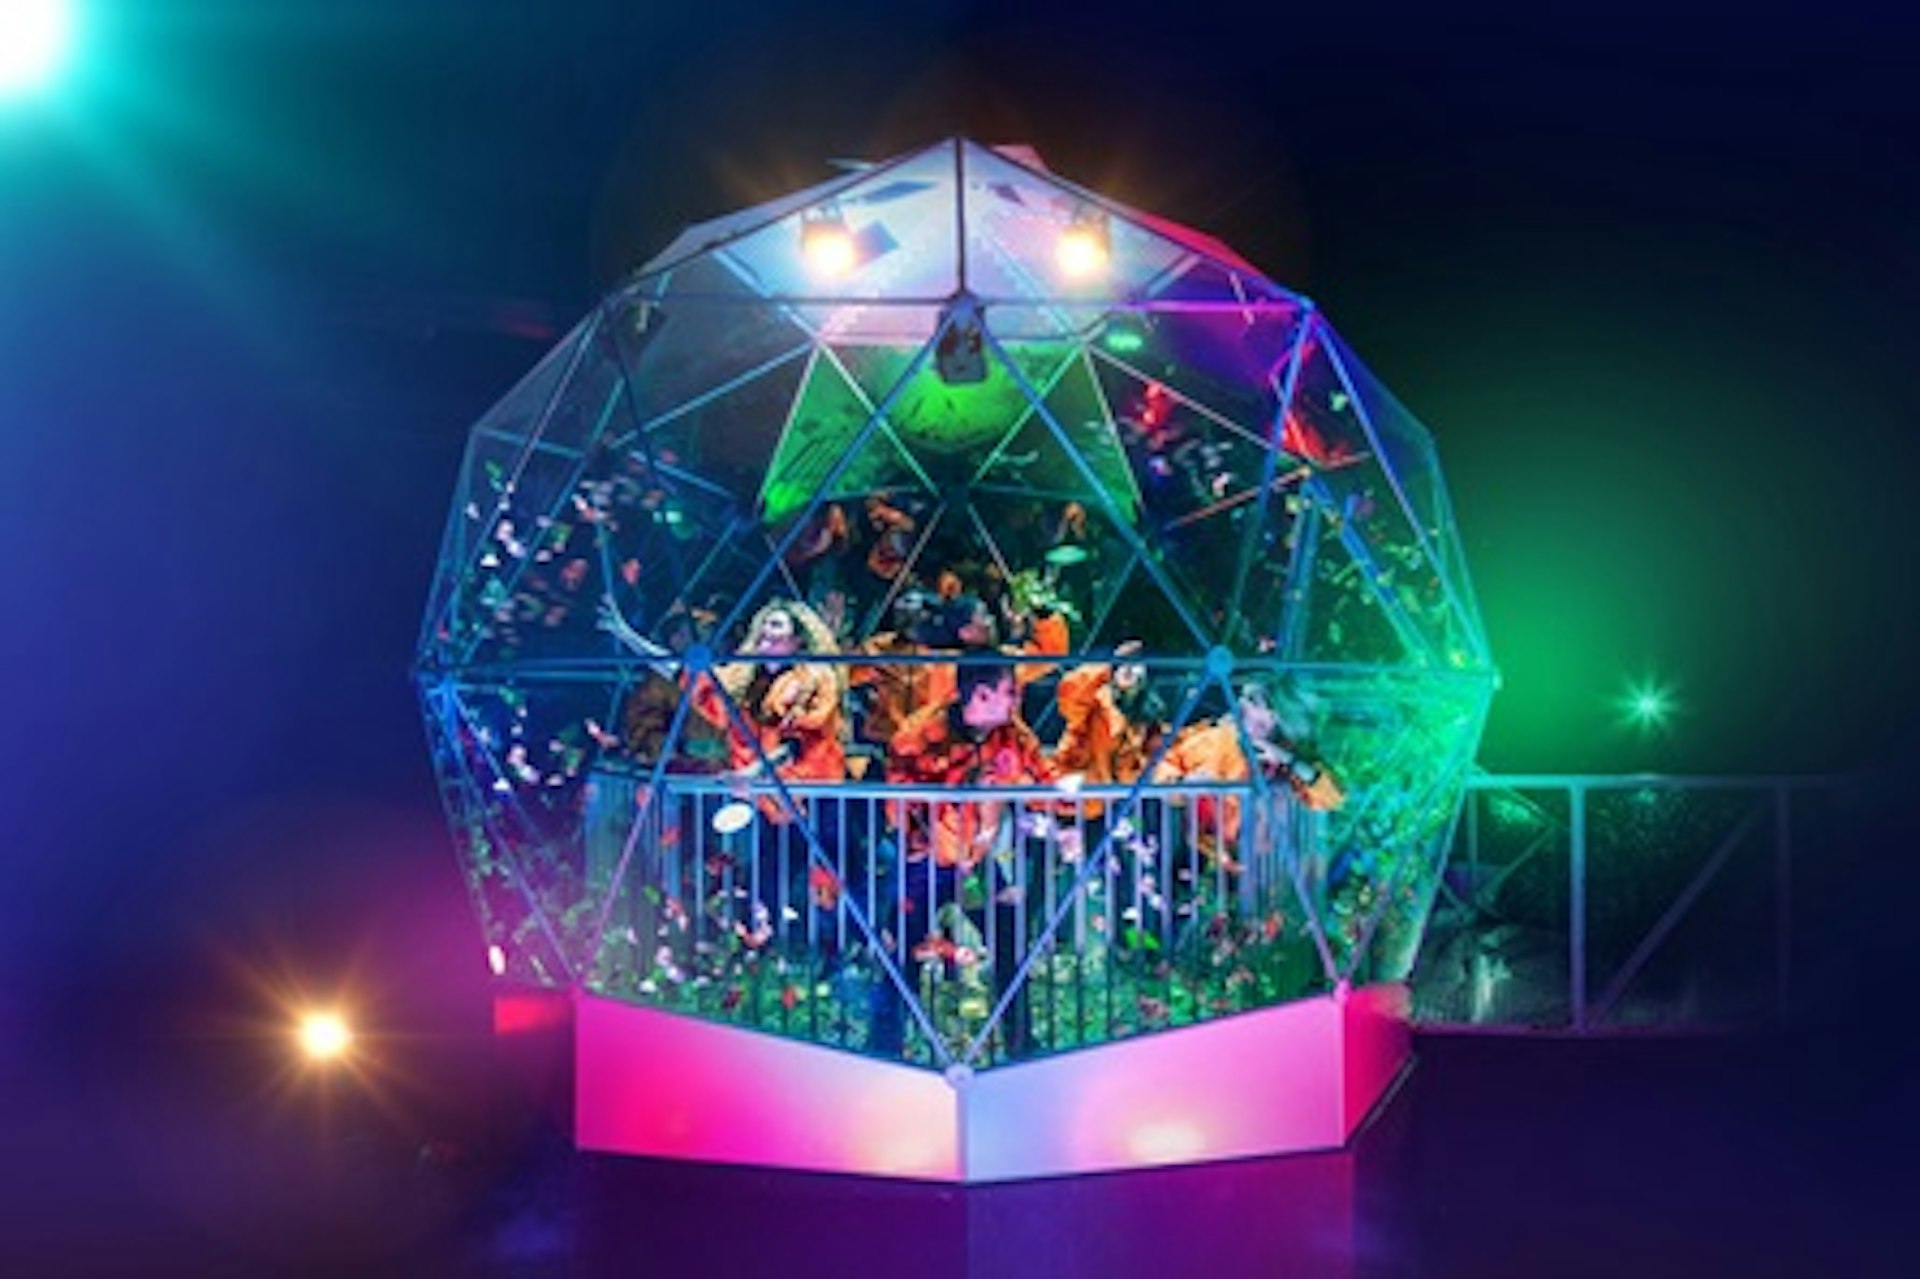 The Crystal Maze LIVE Experience for Two with a Souvenir Crystal and Photo Package, London – Anytime 2